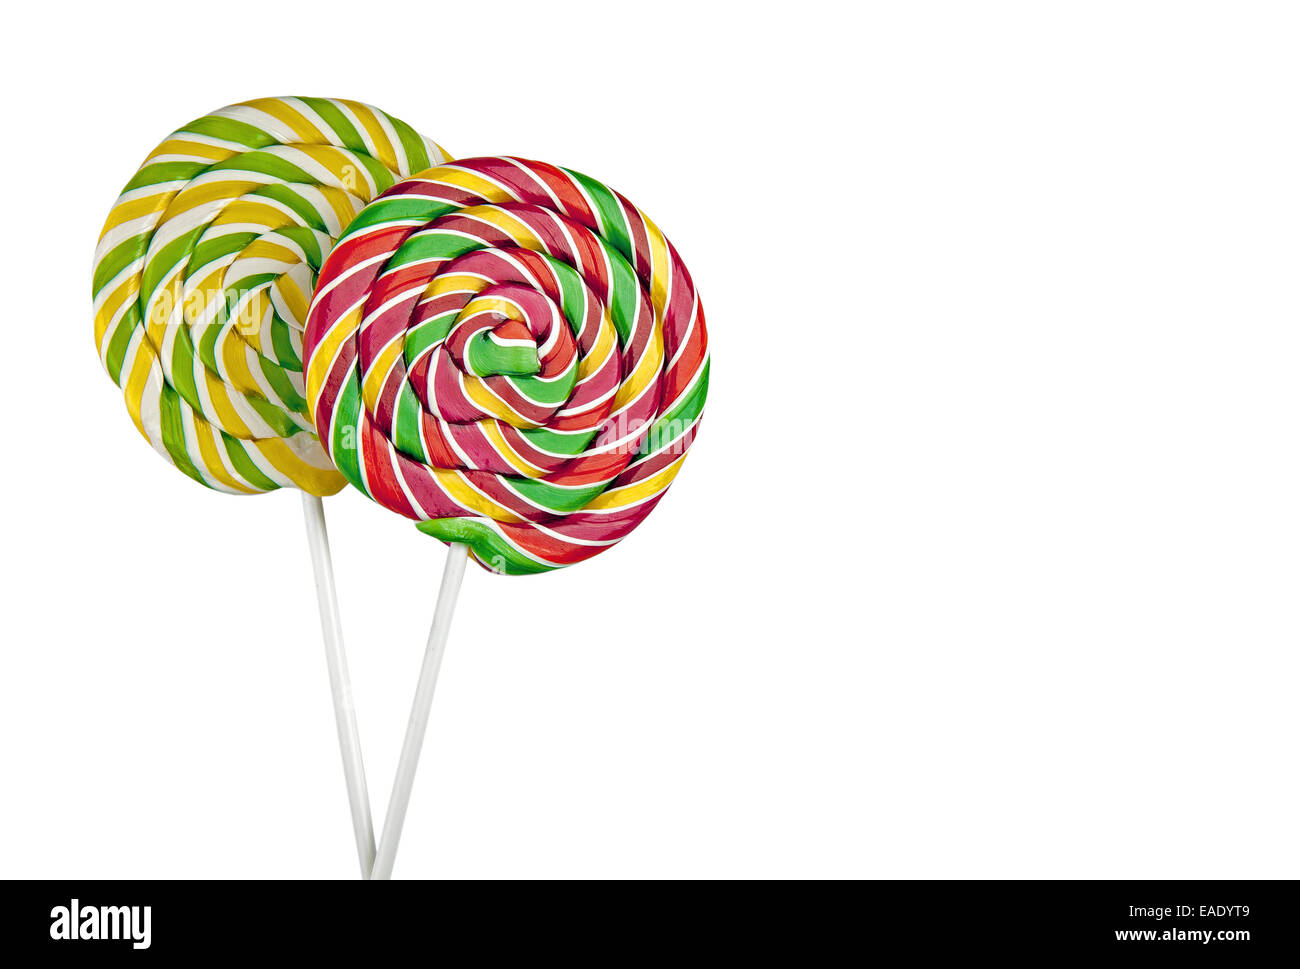 Two colorful lollipops isolated on white background Stock Photo